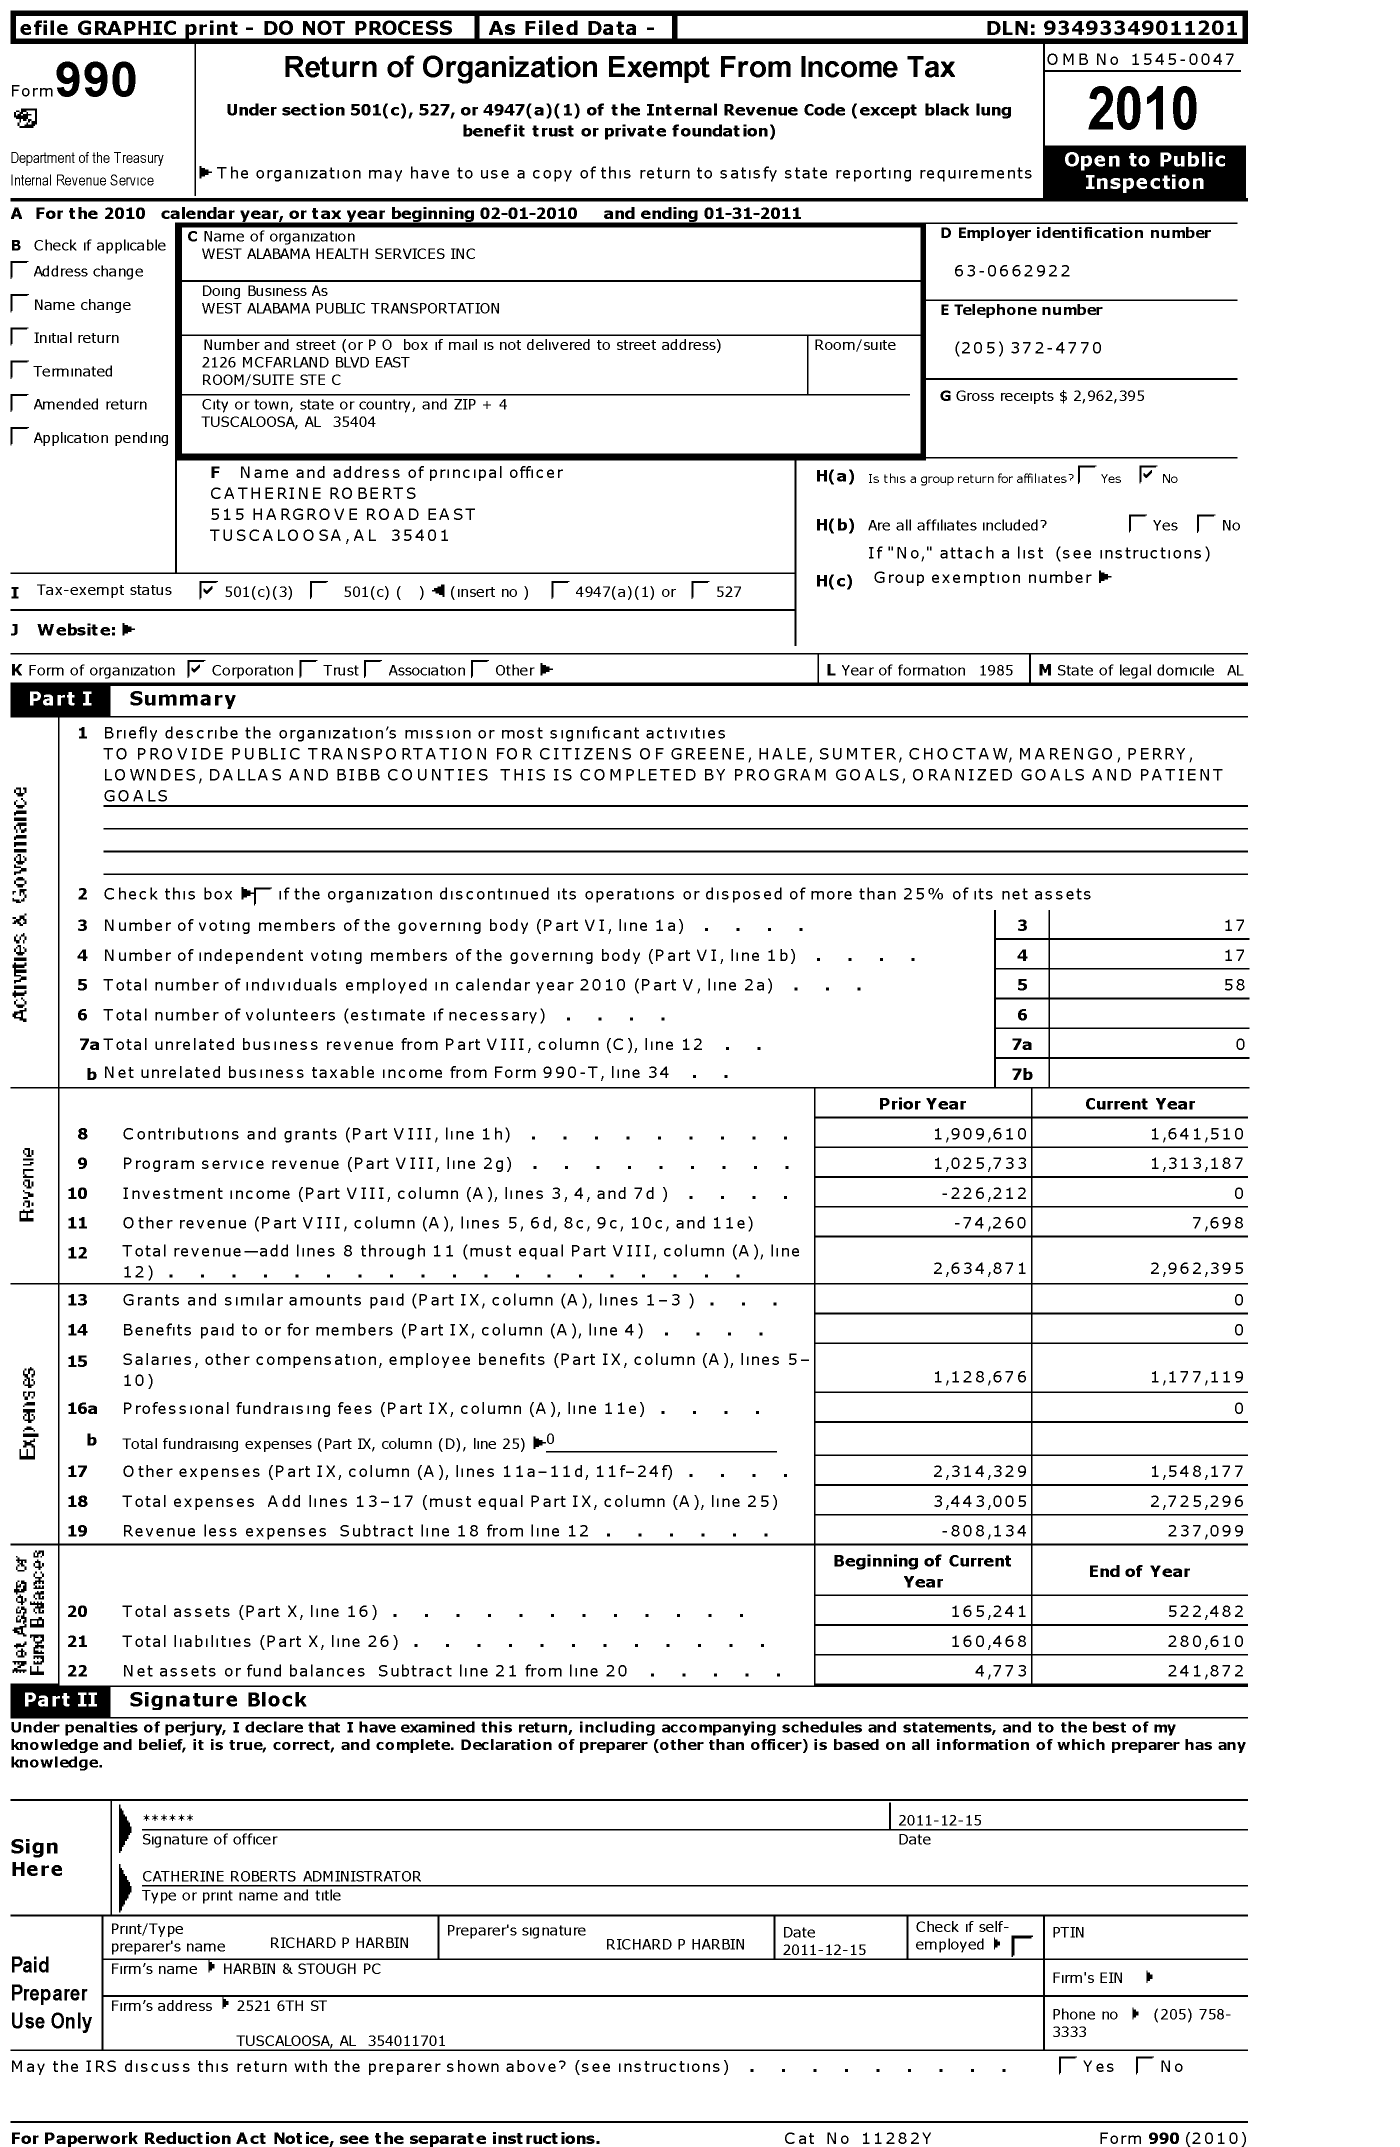 Image of first page of 2010 Form 990 for West Alabama Public Transportation